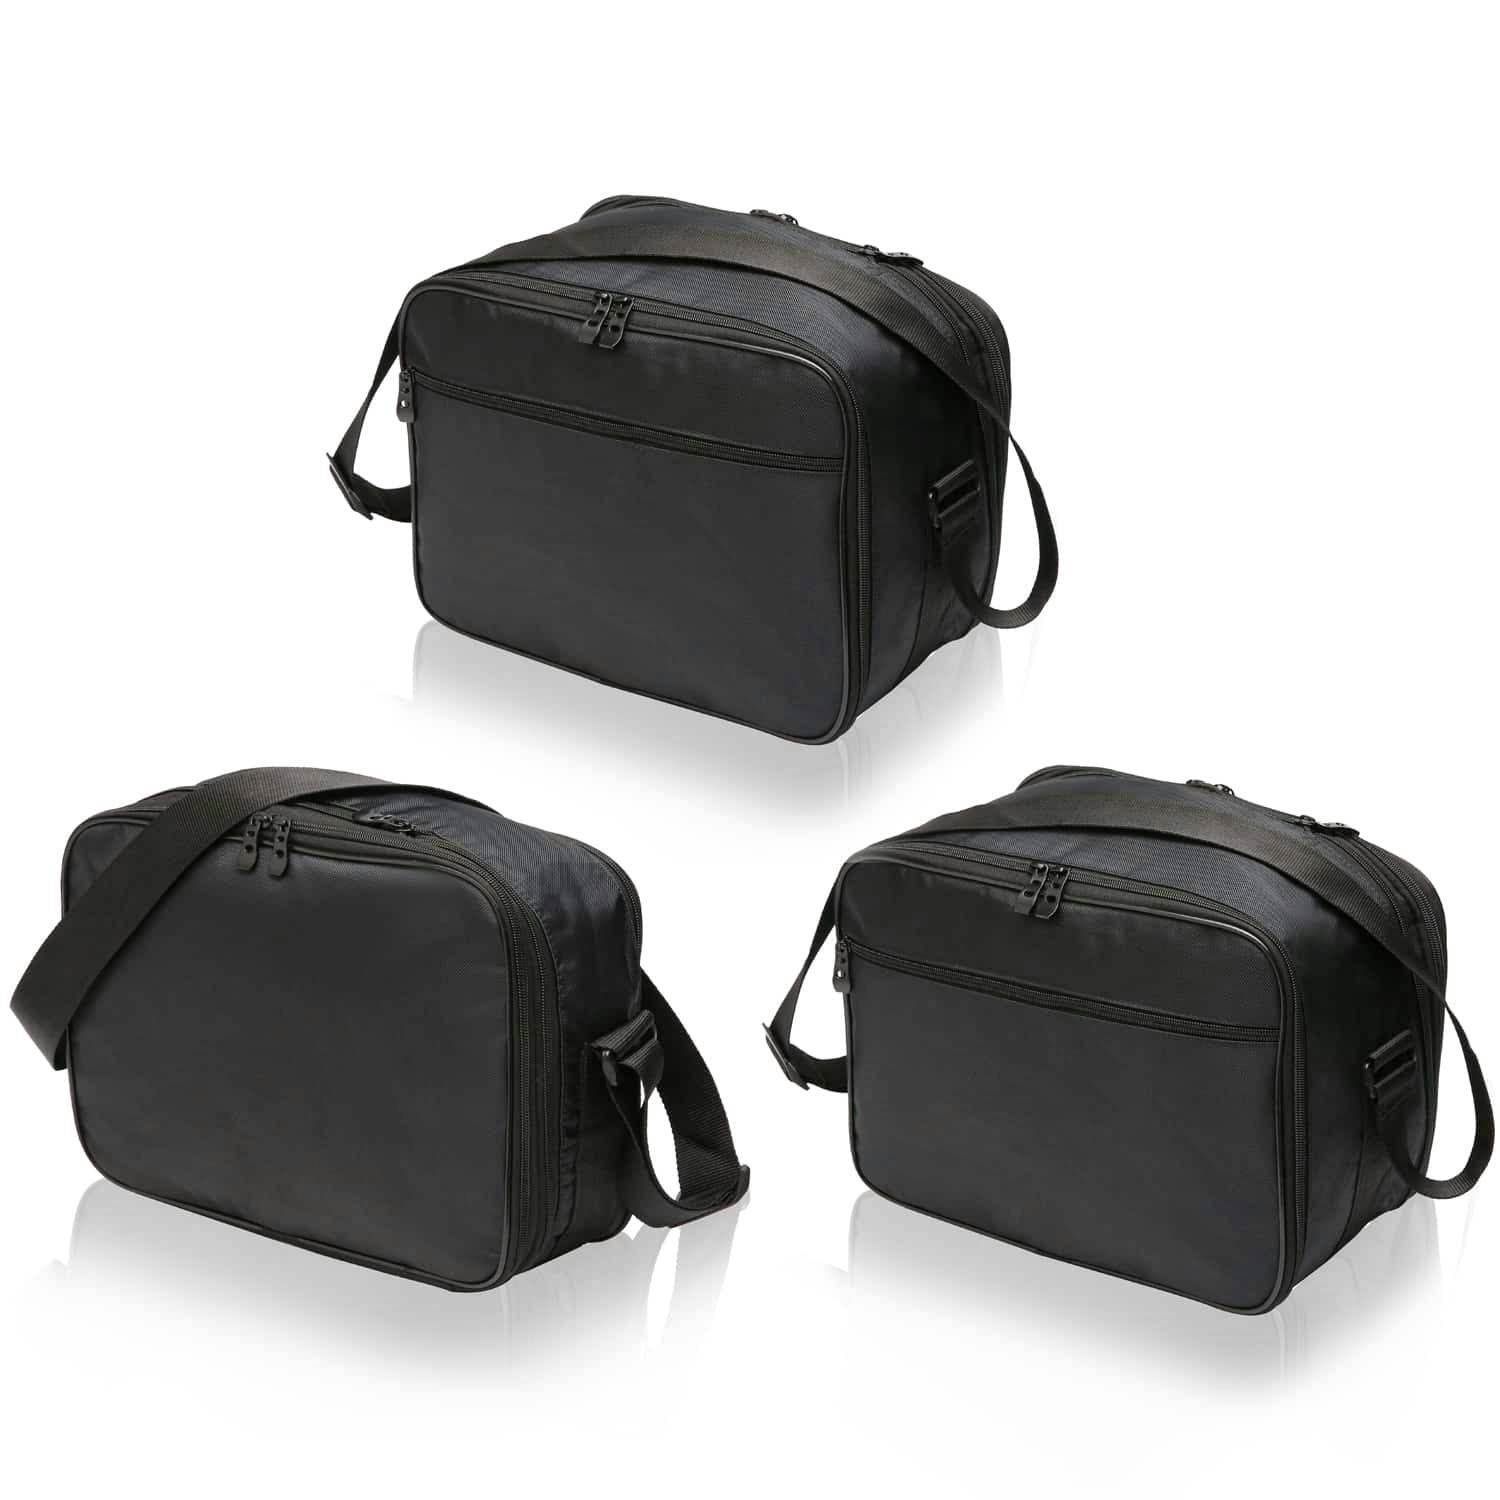 Picture 1 of Pannier inner bags for Vario cases and top case BMW F700GS F800GS R1200GS box 